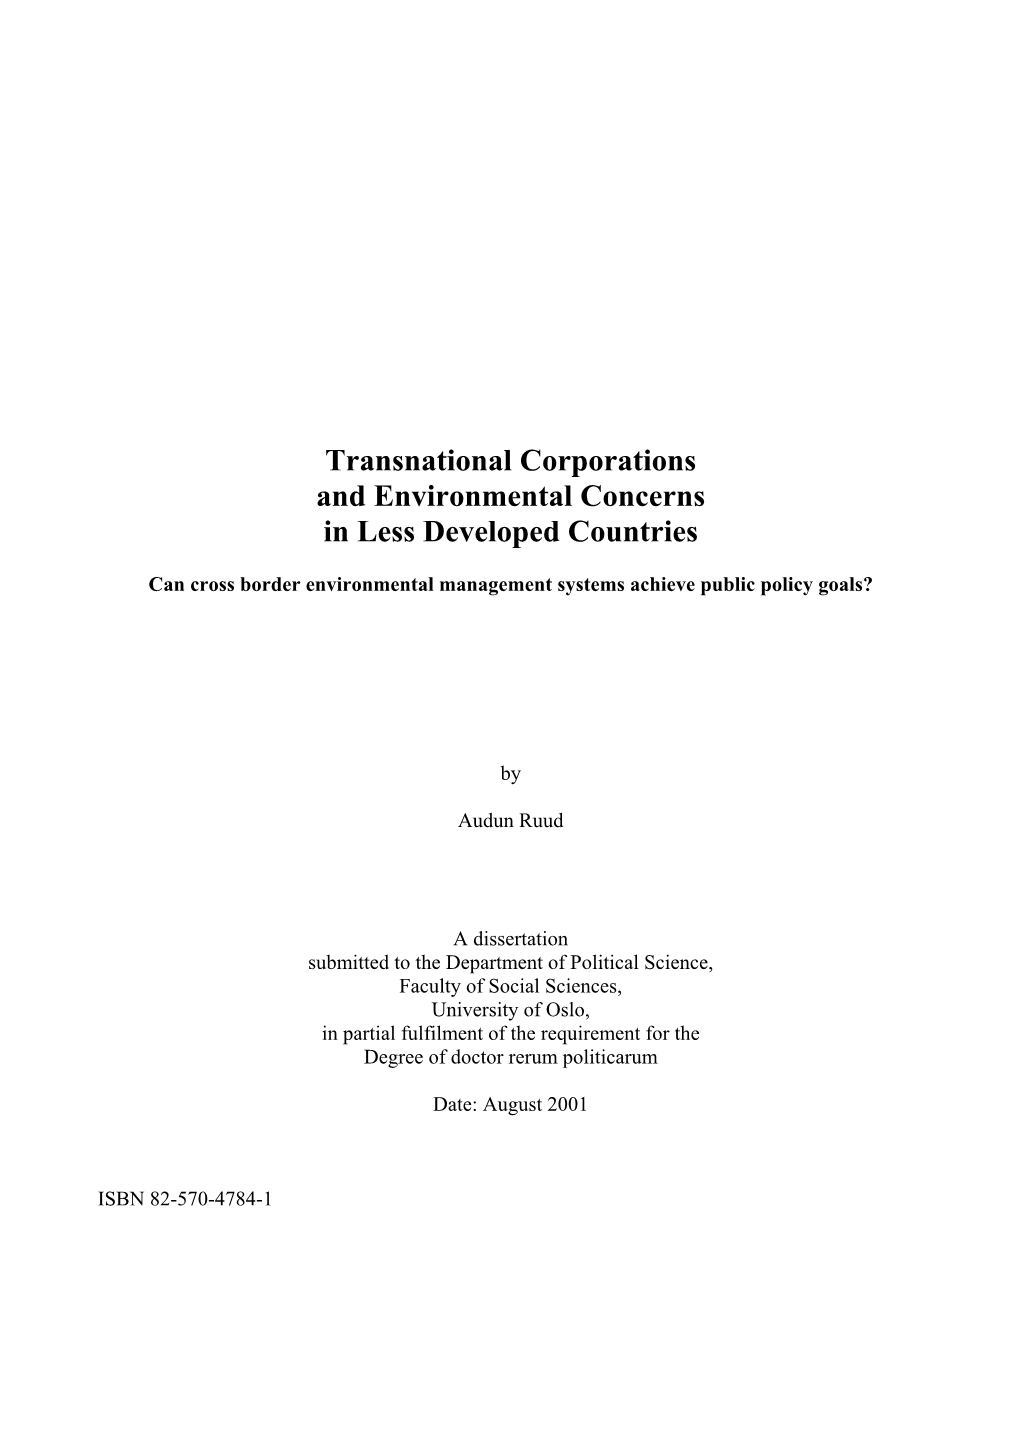 Transnational Corporations and Environmental Concerns in Less Developed Countries